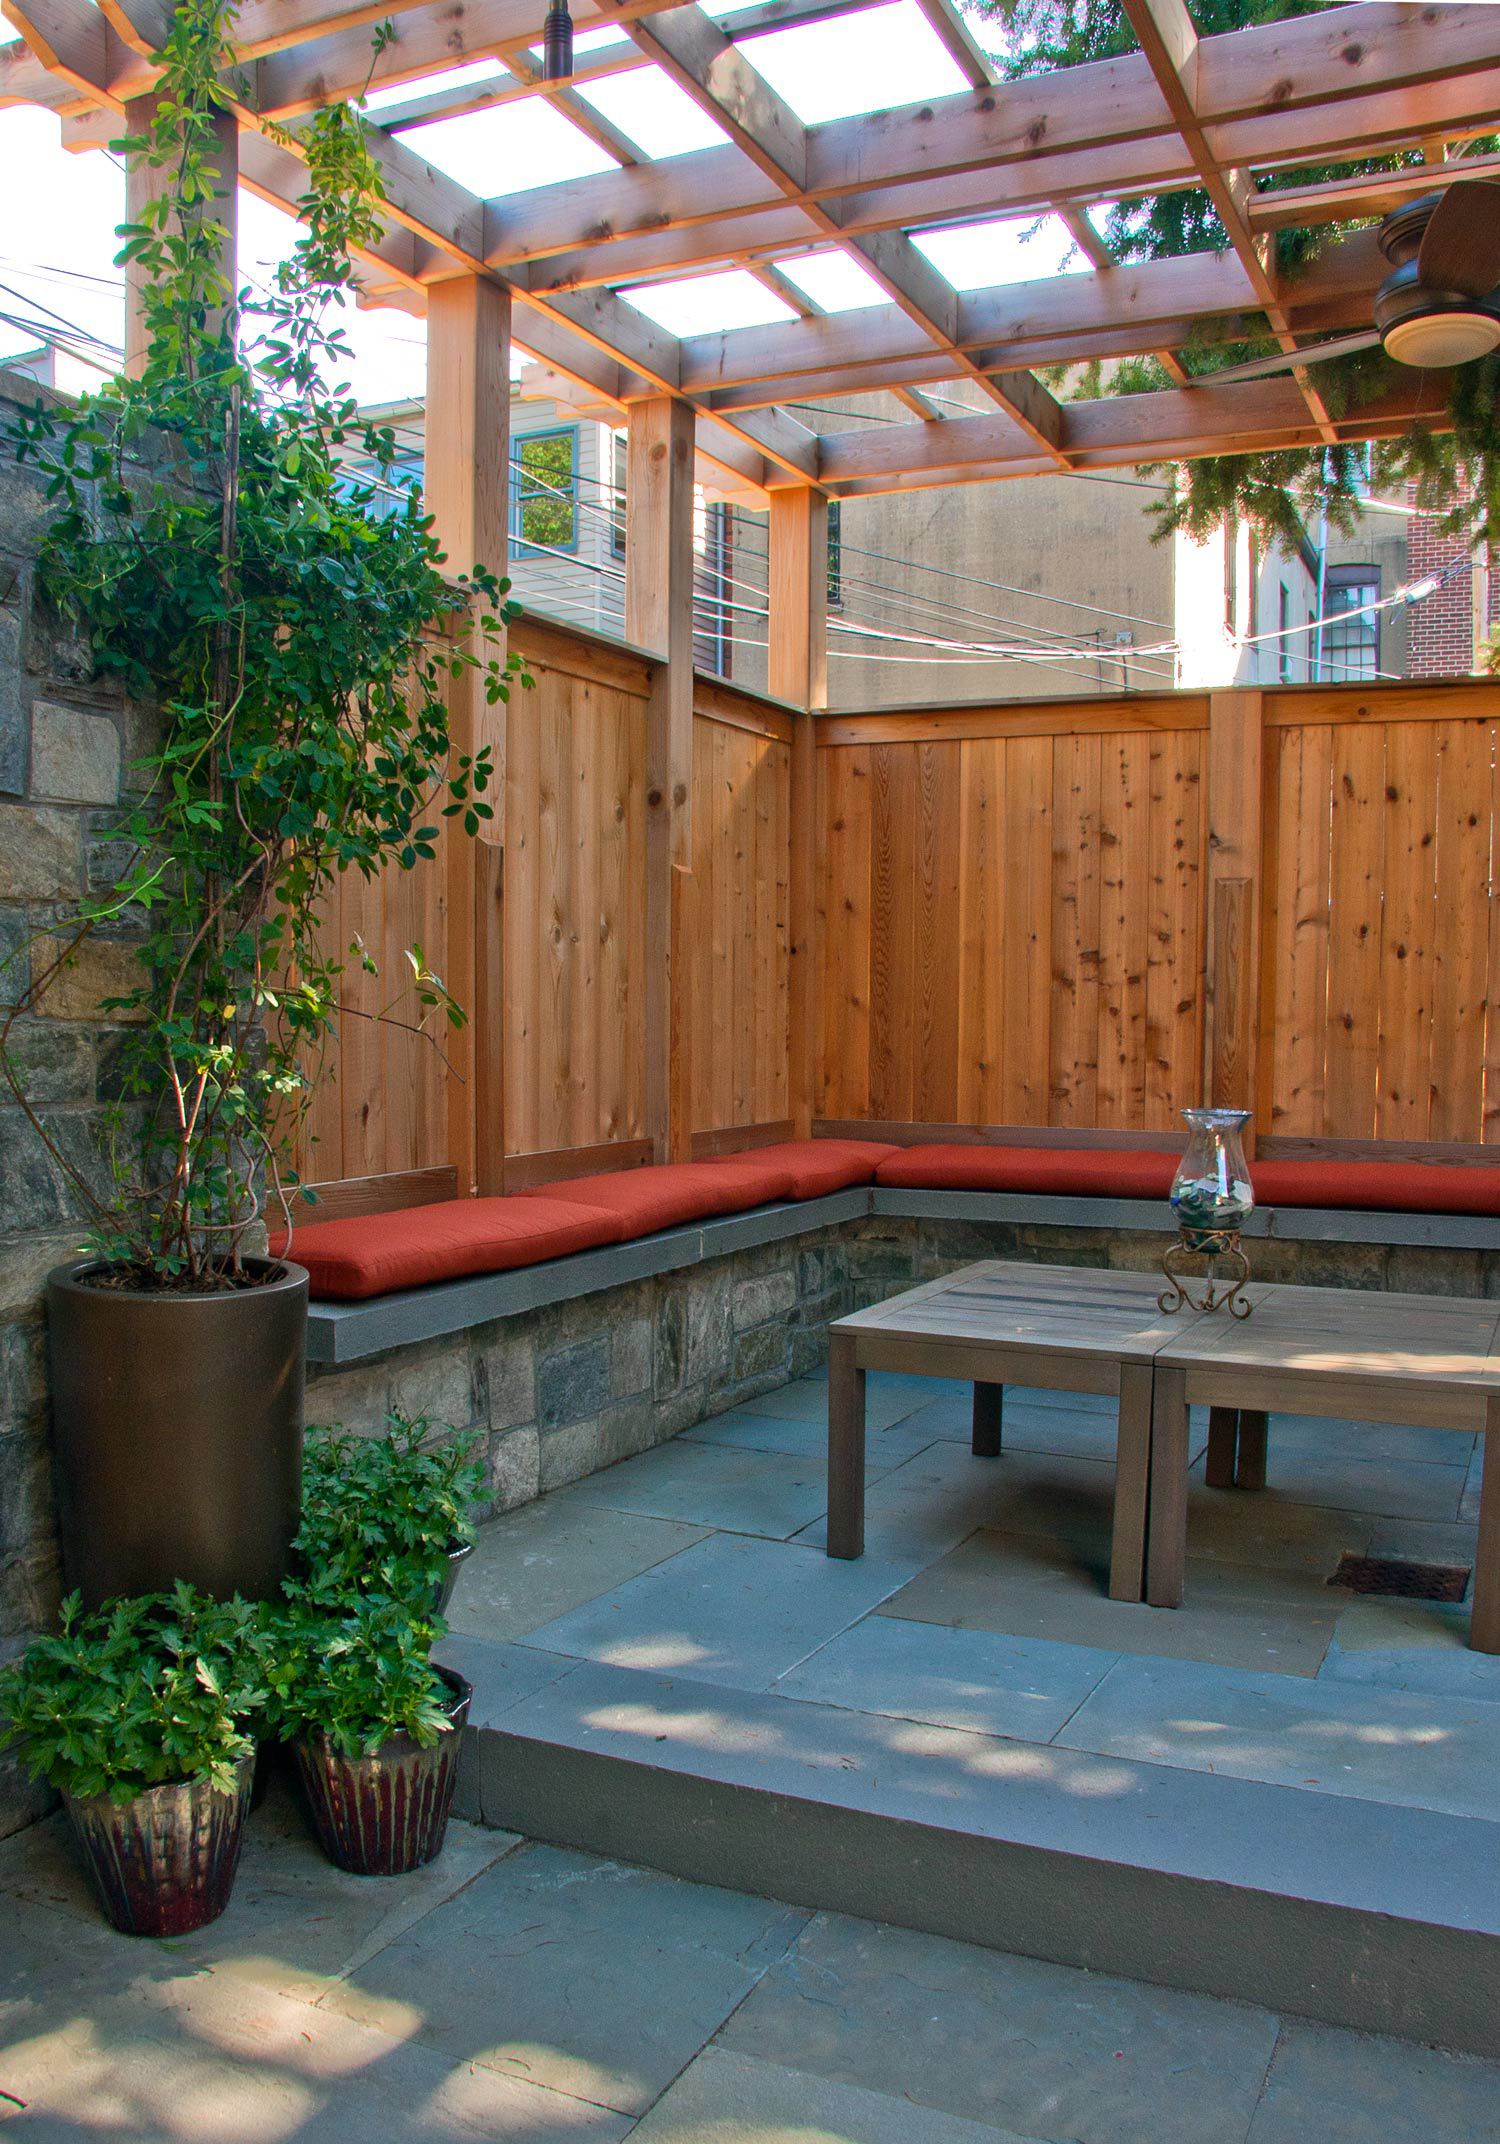   Project Location: &nbsp;Washington, DC (Capitol Hill)  Completion: &nbsp;Spring 2012  General Contractor: &nbsp;Redux Garden &amp; Home  Primary Material Palette: &nbsp;Carderock stone, western red cedar, bluestone, granite cobbles  Photos By: &nbs